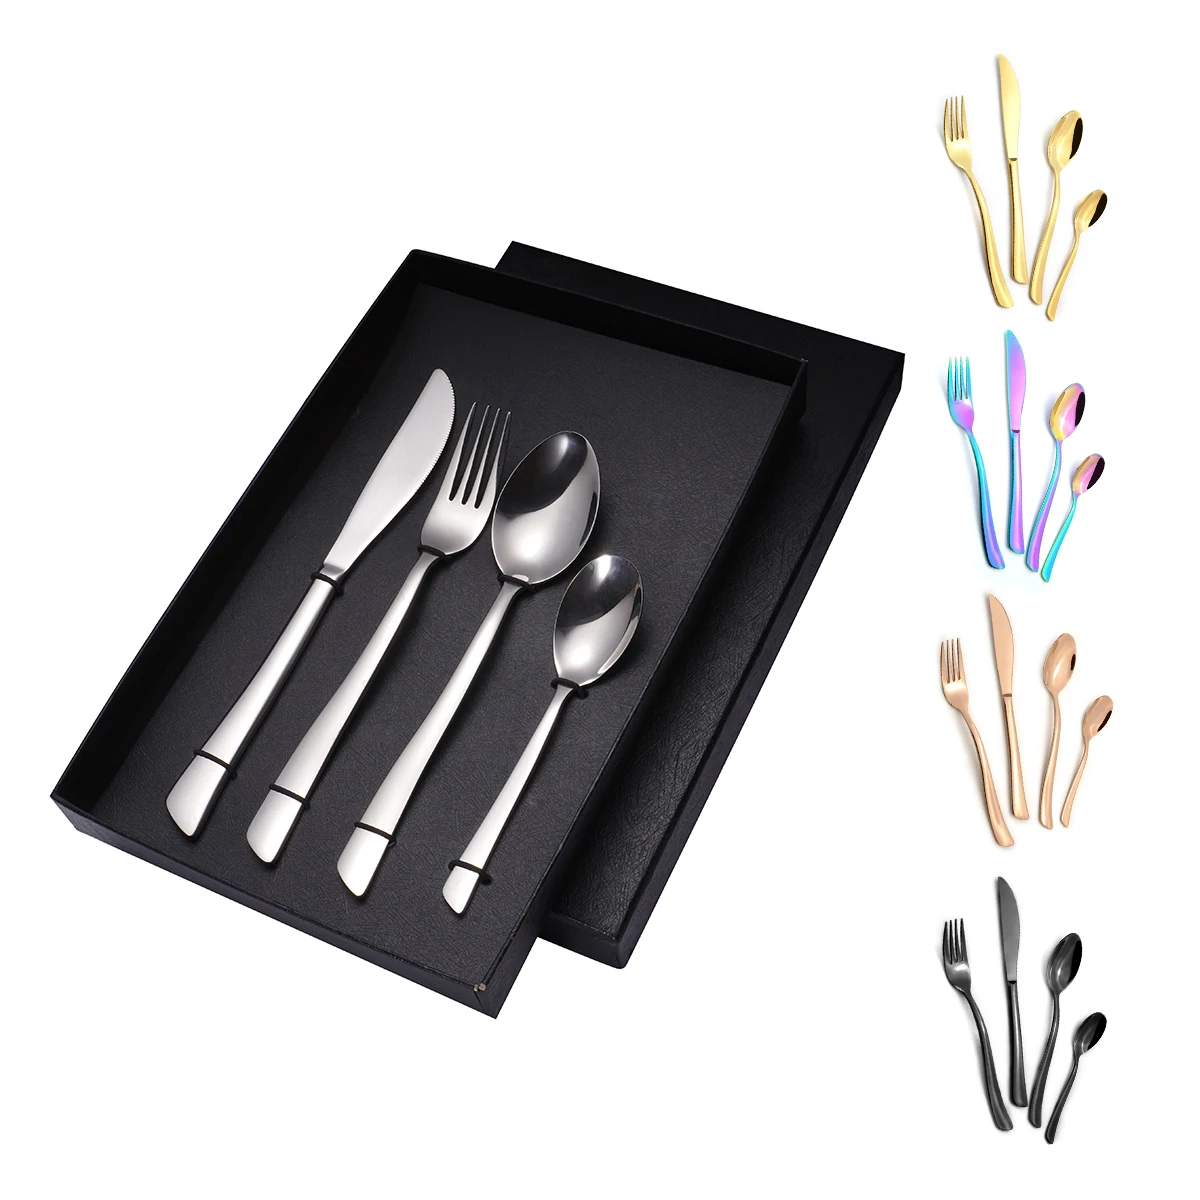 

Stainless Steel Gottinghen Flatware Portable Wedding Polished Knife Spoon Fork Set 4Pcs Gold Luxury Cutlery Set With Gift Box, Silver